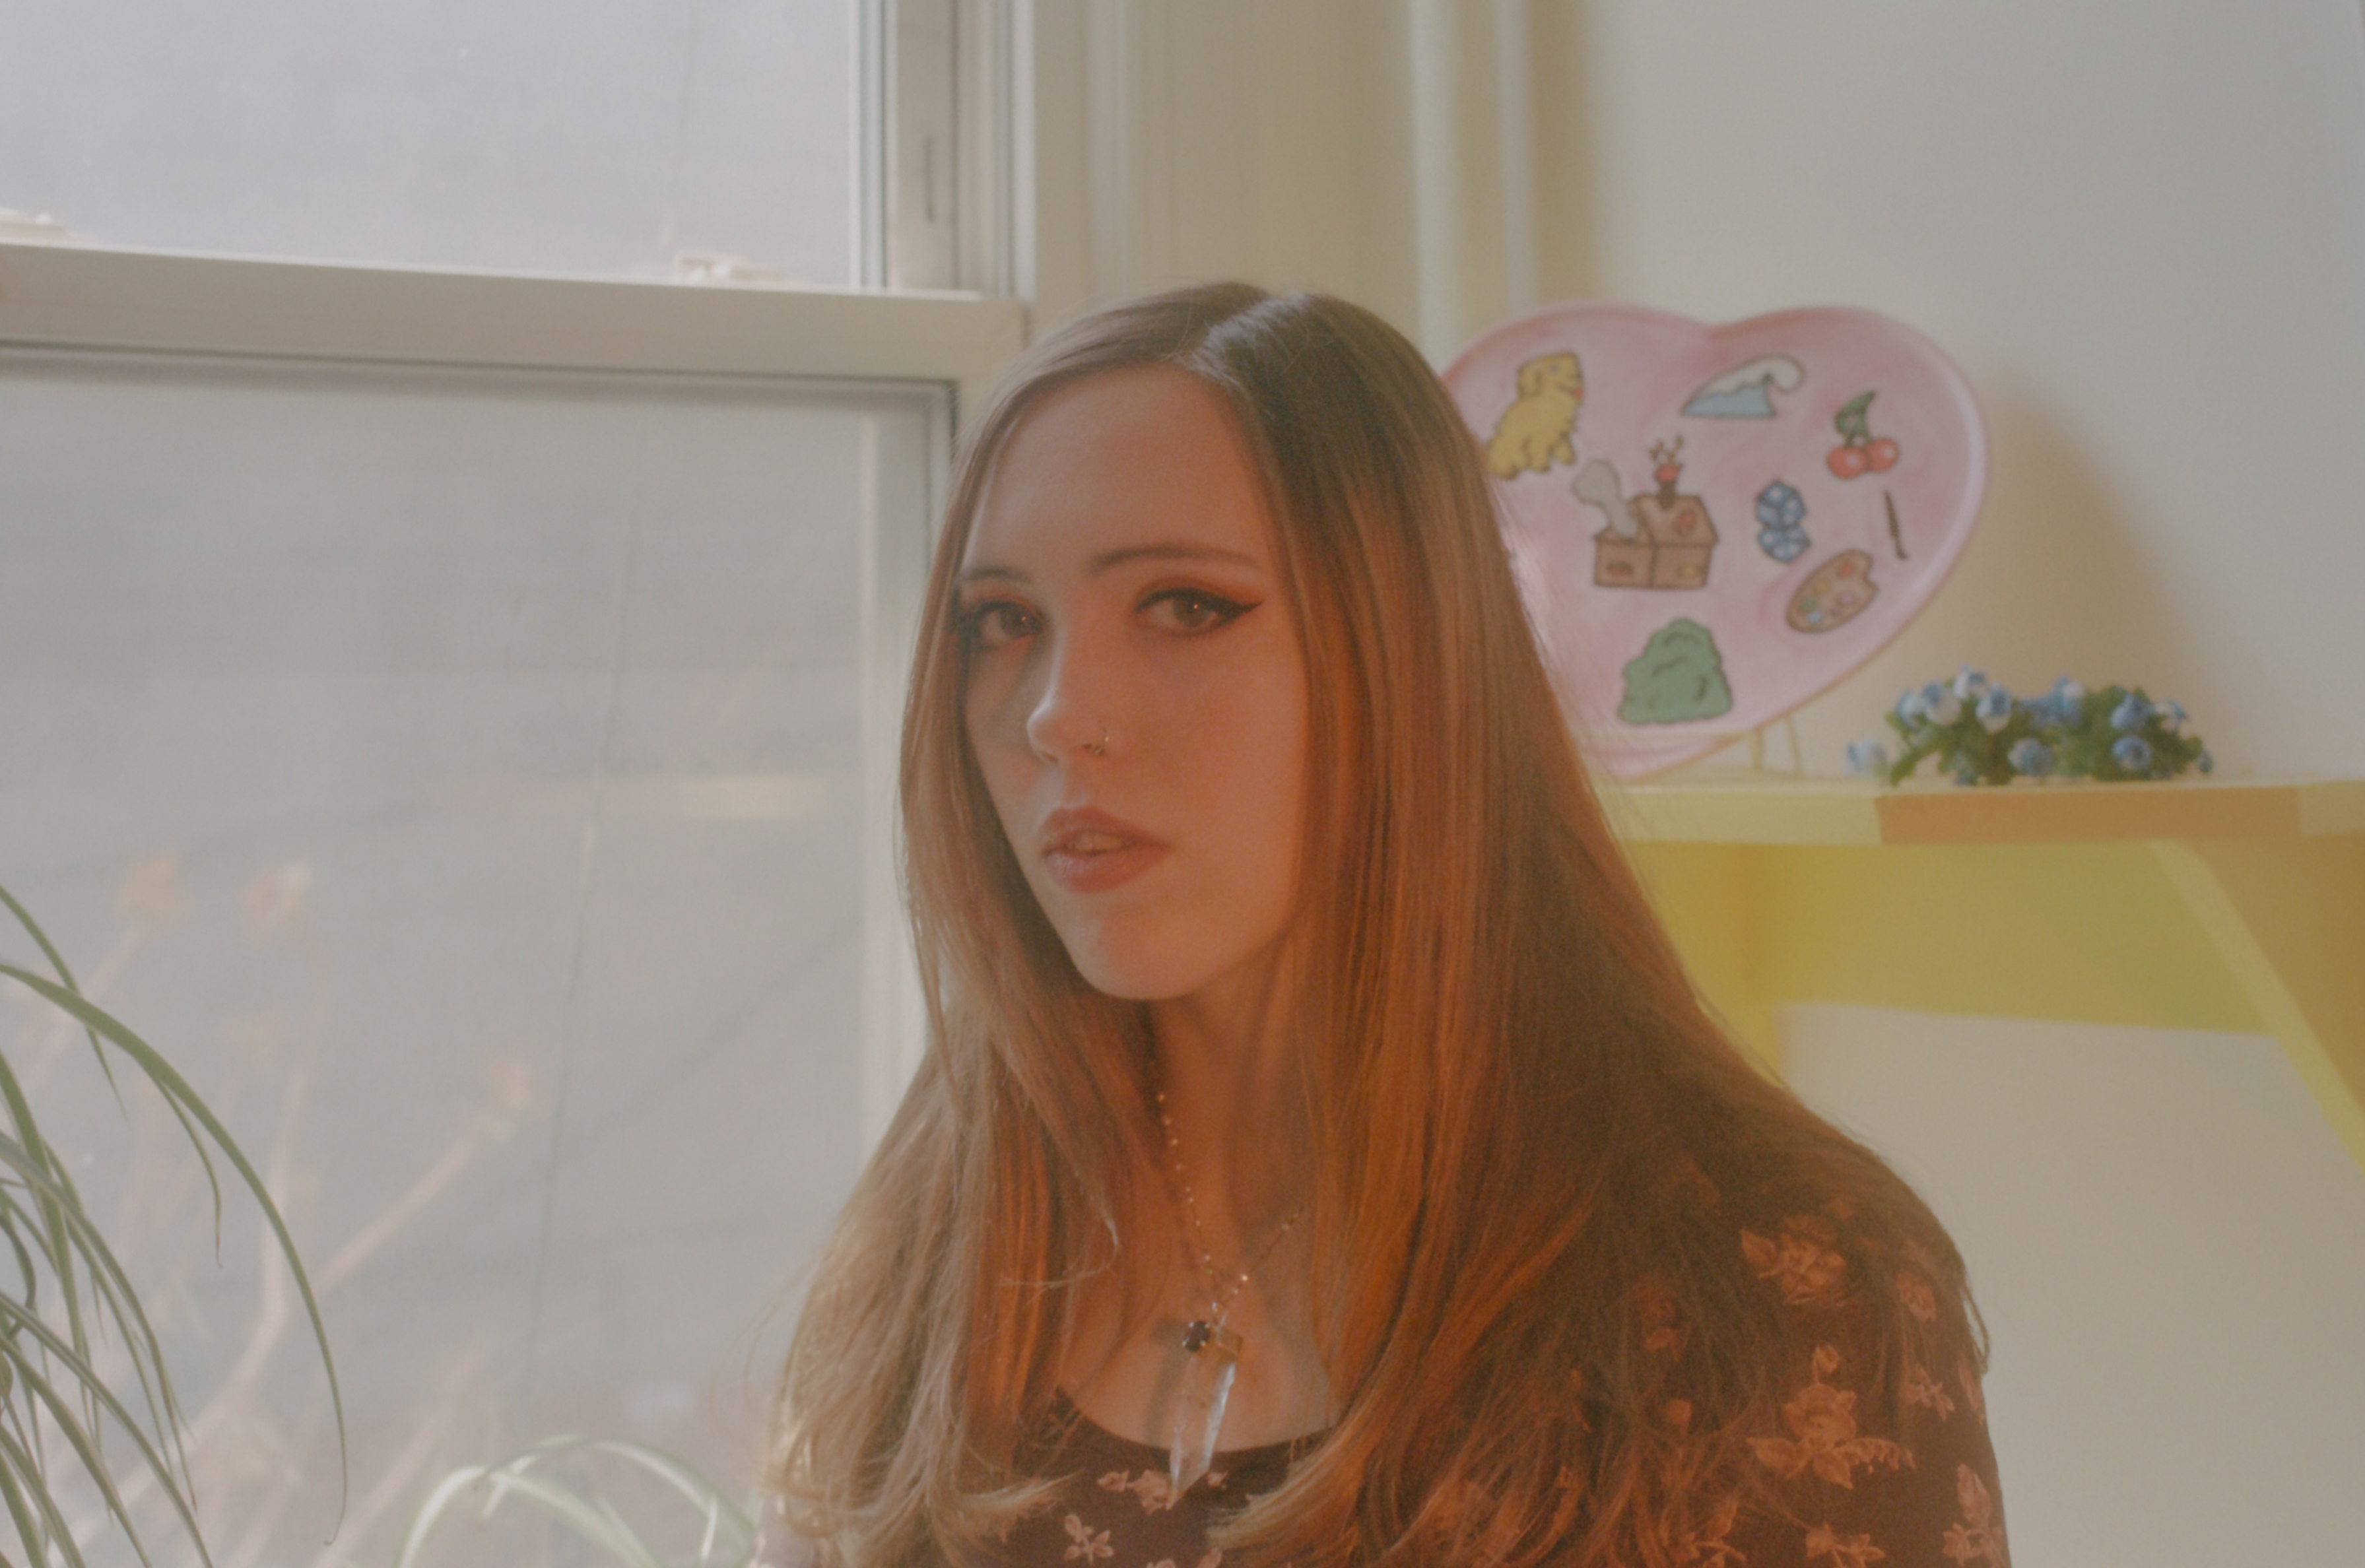 Soccer Mommy announces new tour dates with Kacey Musgraves, and video for "Scorpio Rising"